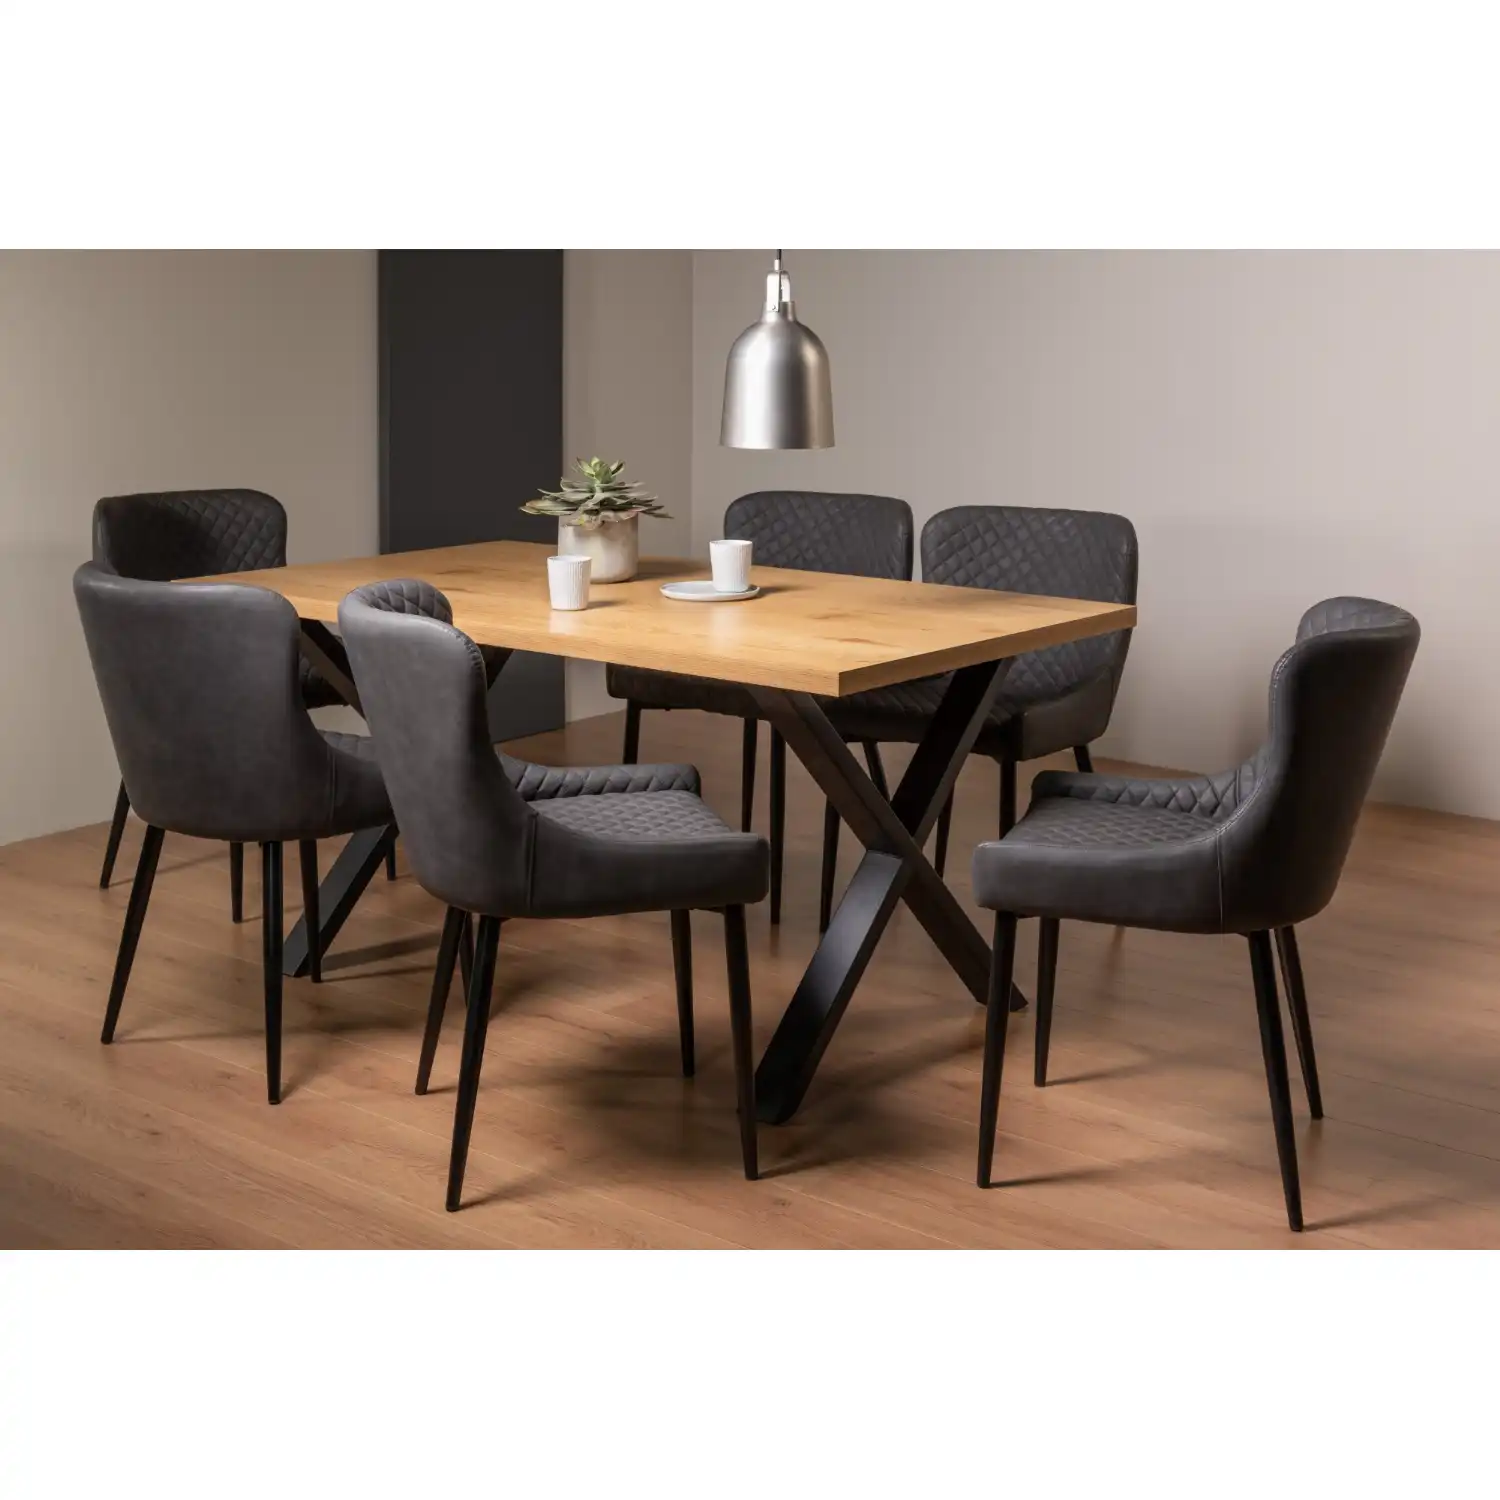 Rustic Oak Dining Table Set 6 Grey Leather Dining Chairs